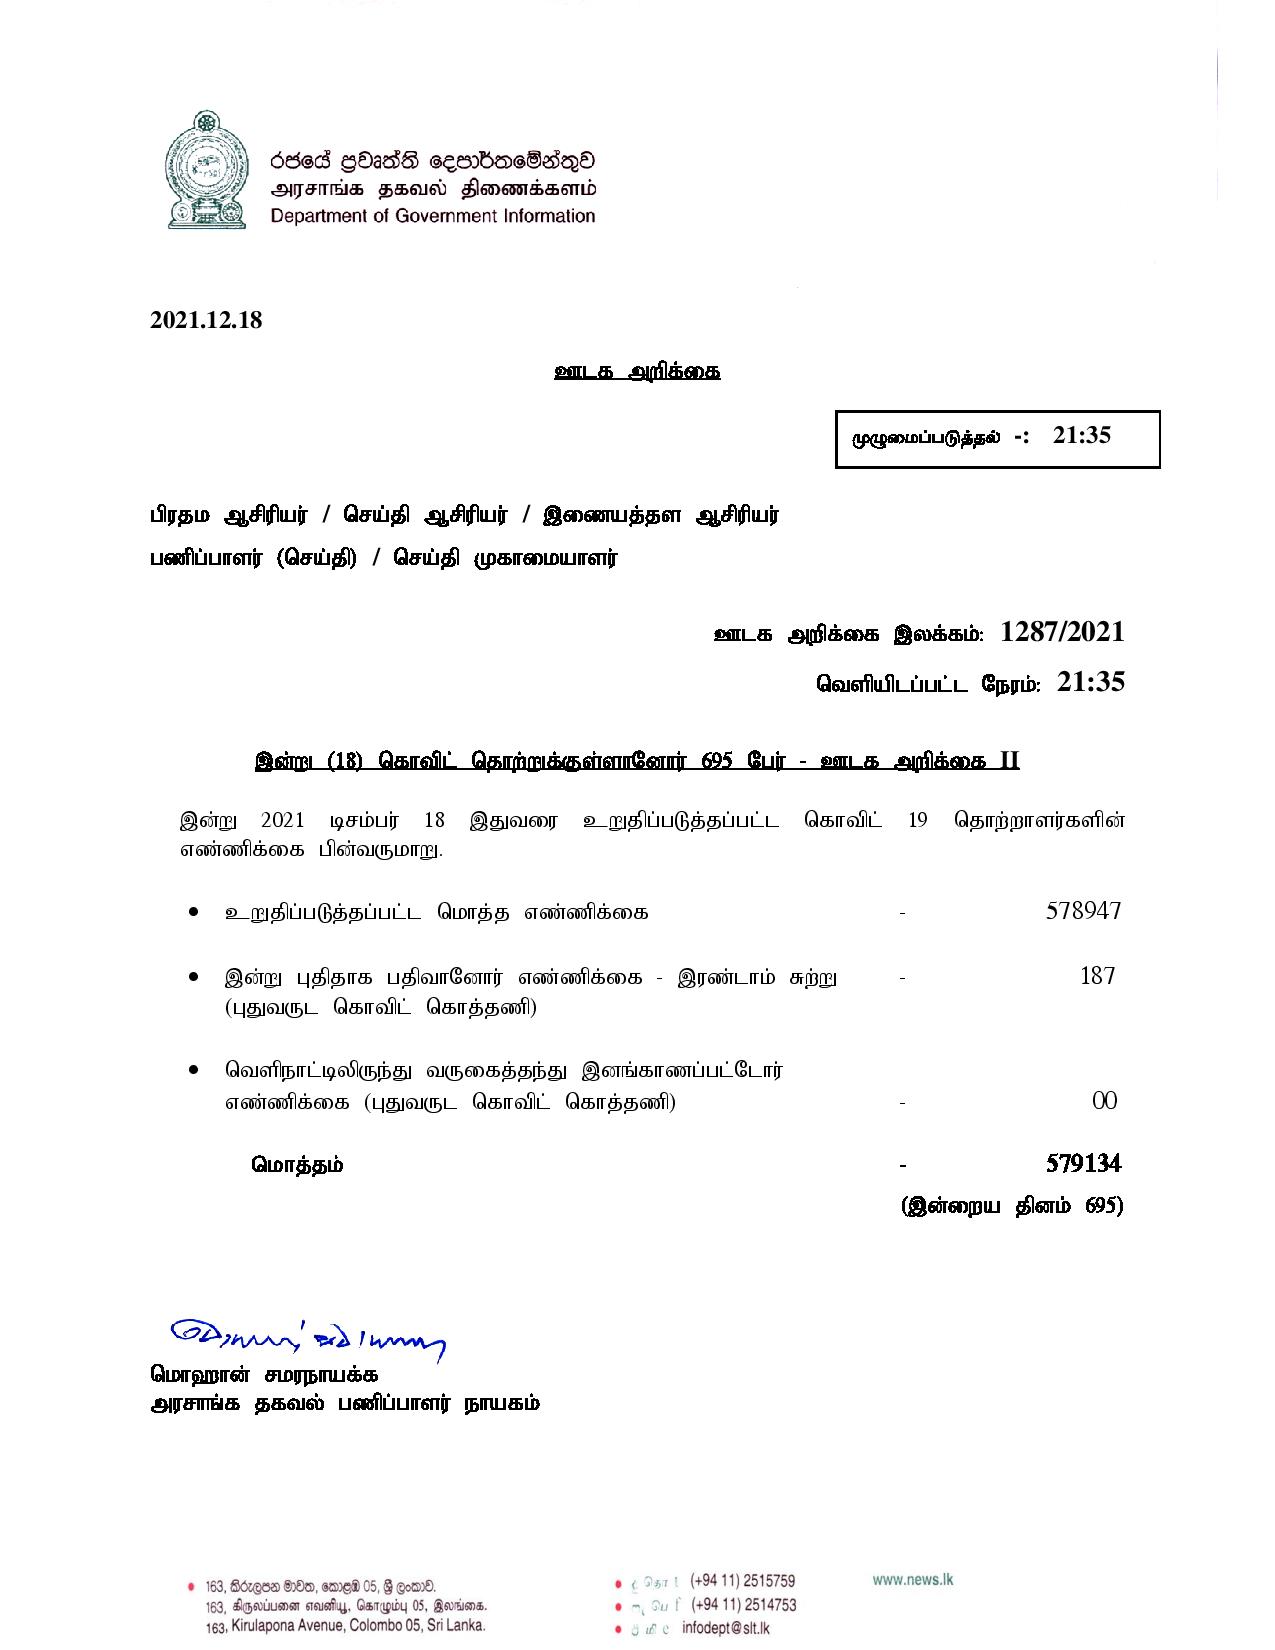 Press Release 1287 Tamil page 001